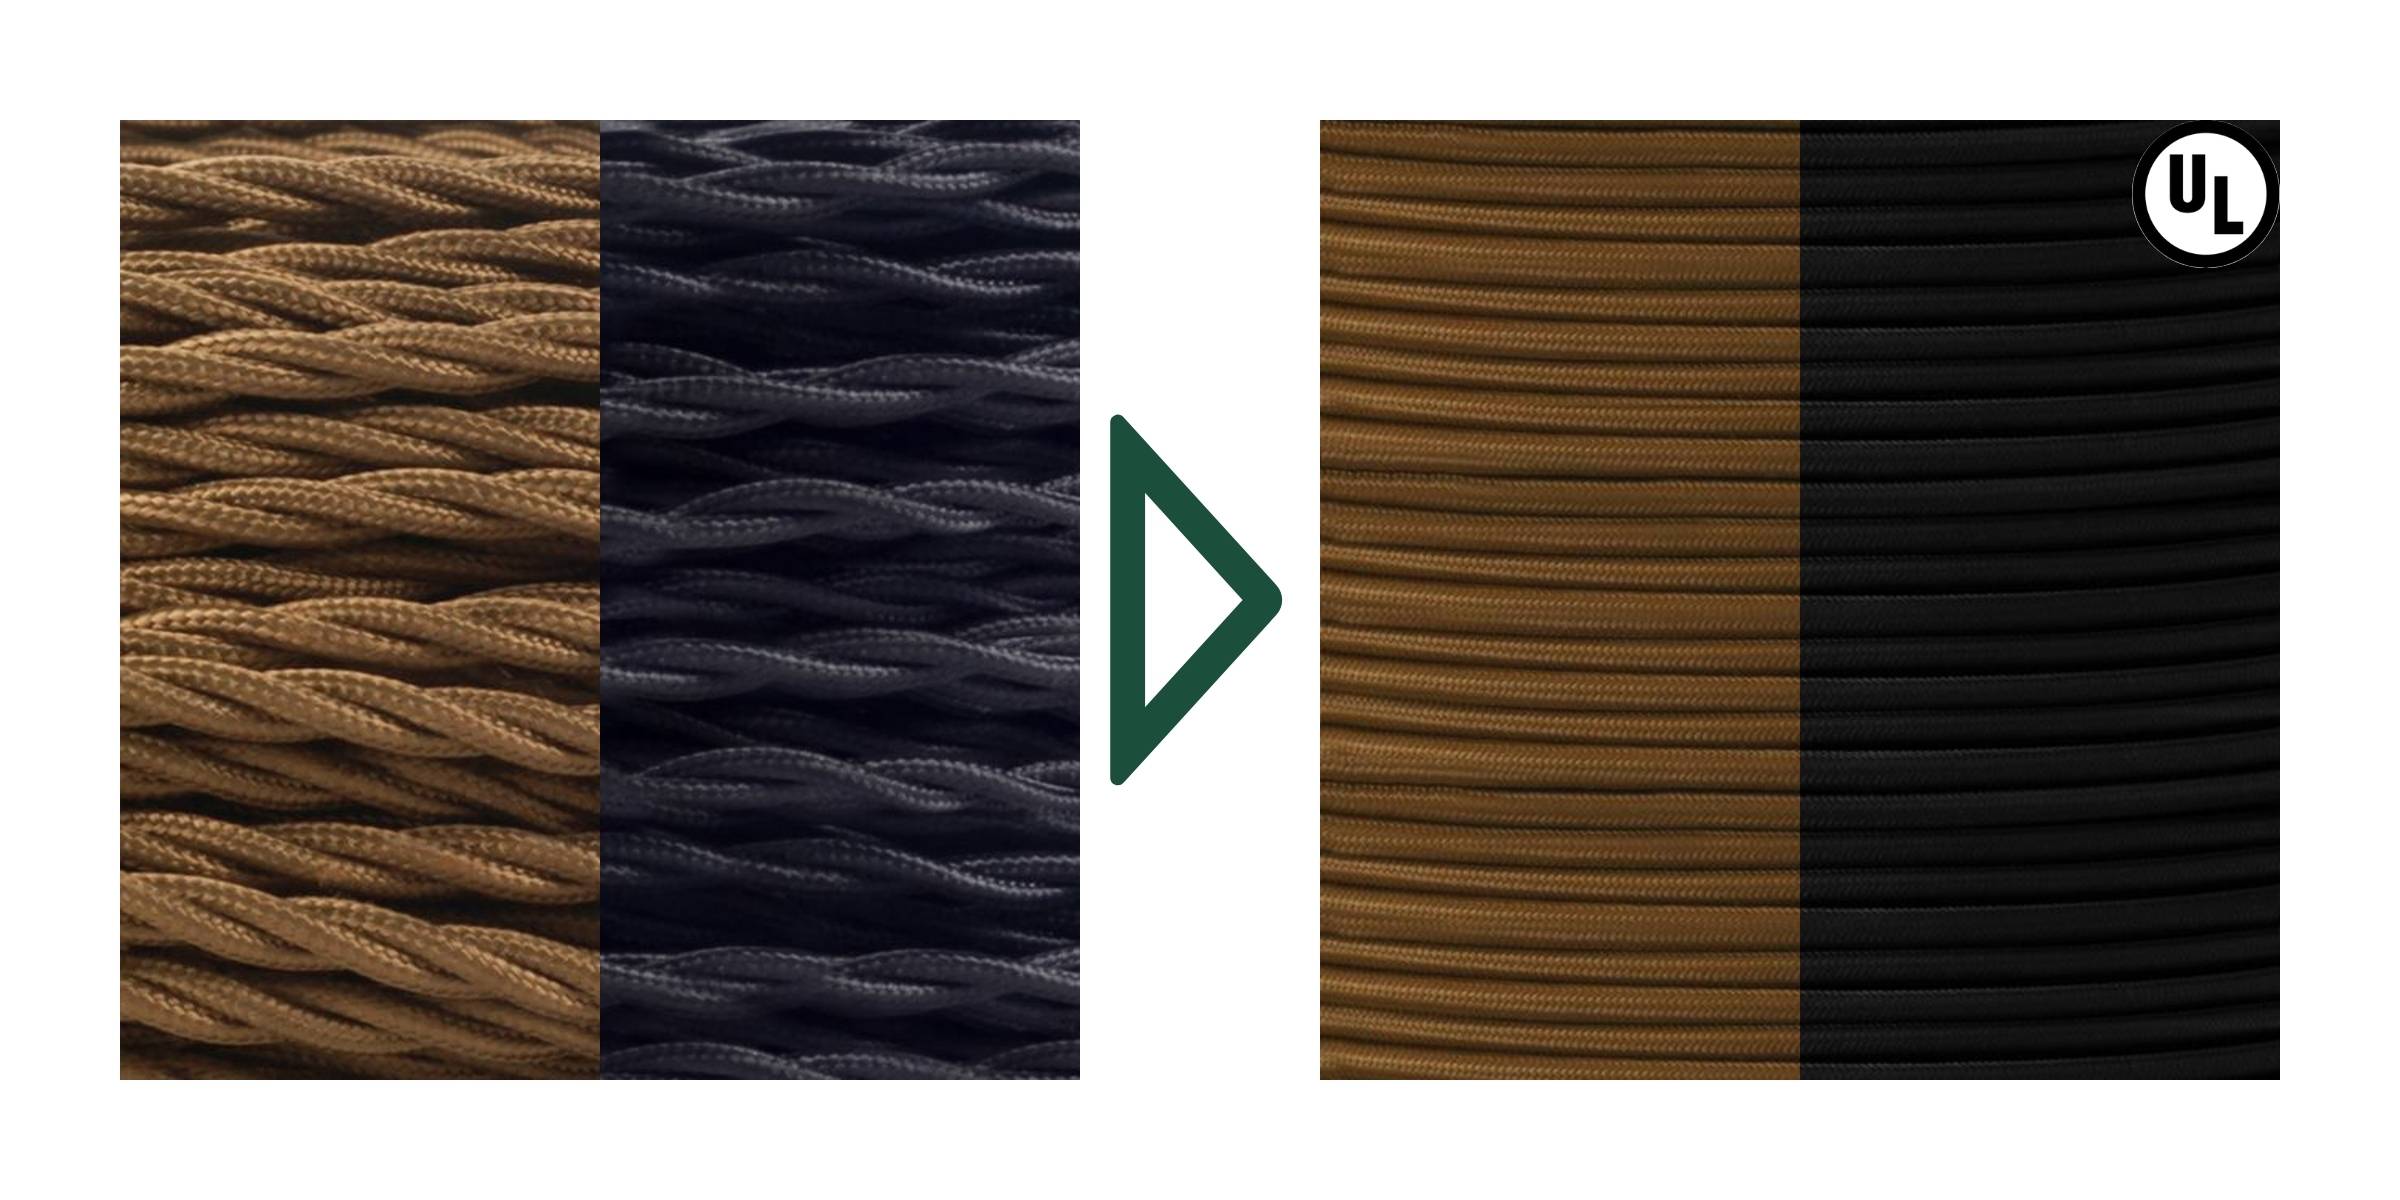 Twisted cables are replaced with brown or black braided round cable.